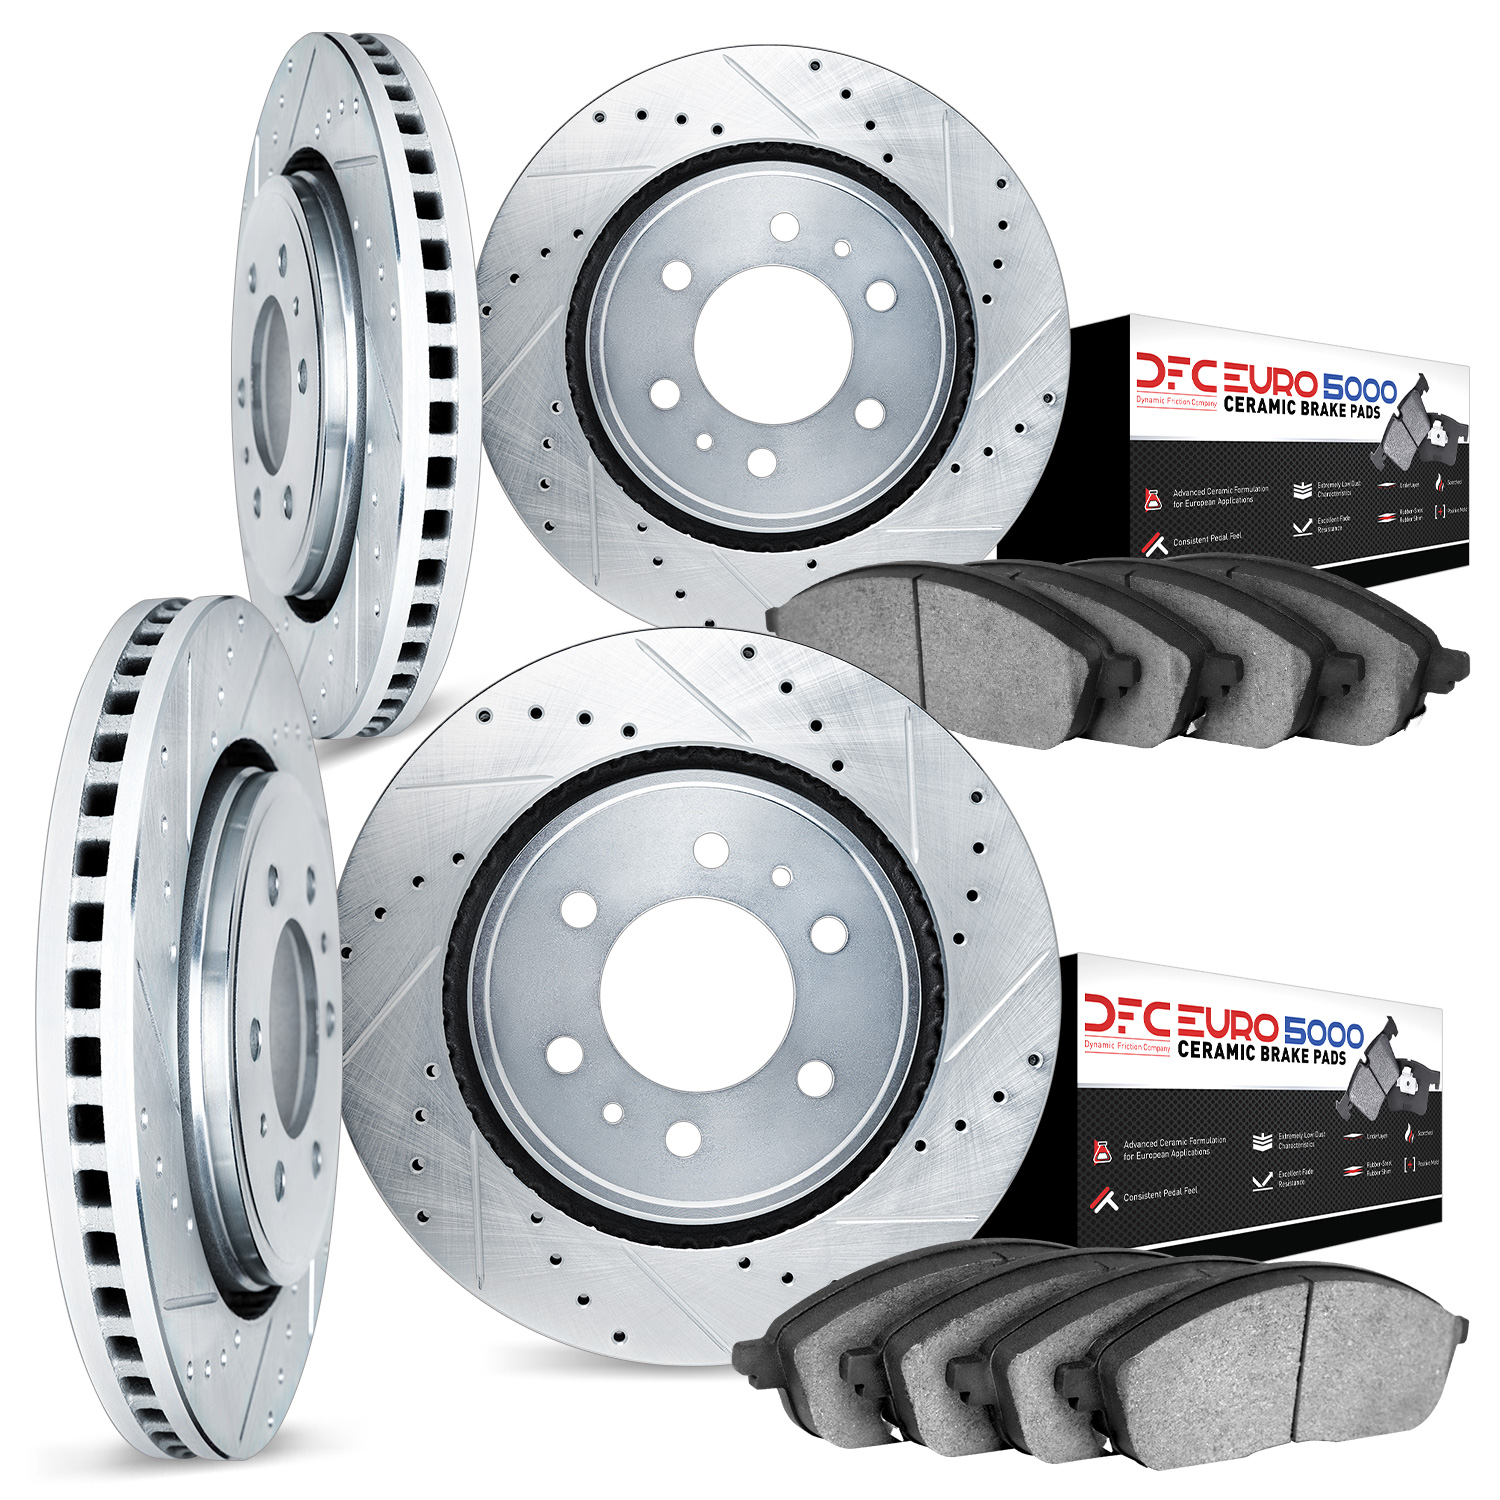 7604-48001 Drilled/Slotted Brake Rotors w/5000 Euro Ceramic Brake Pads Kit [Silver], 2002-2005 GM, Position: Front and Rear